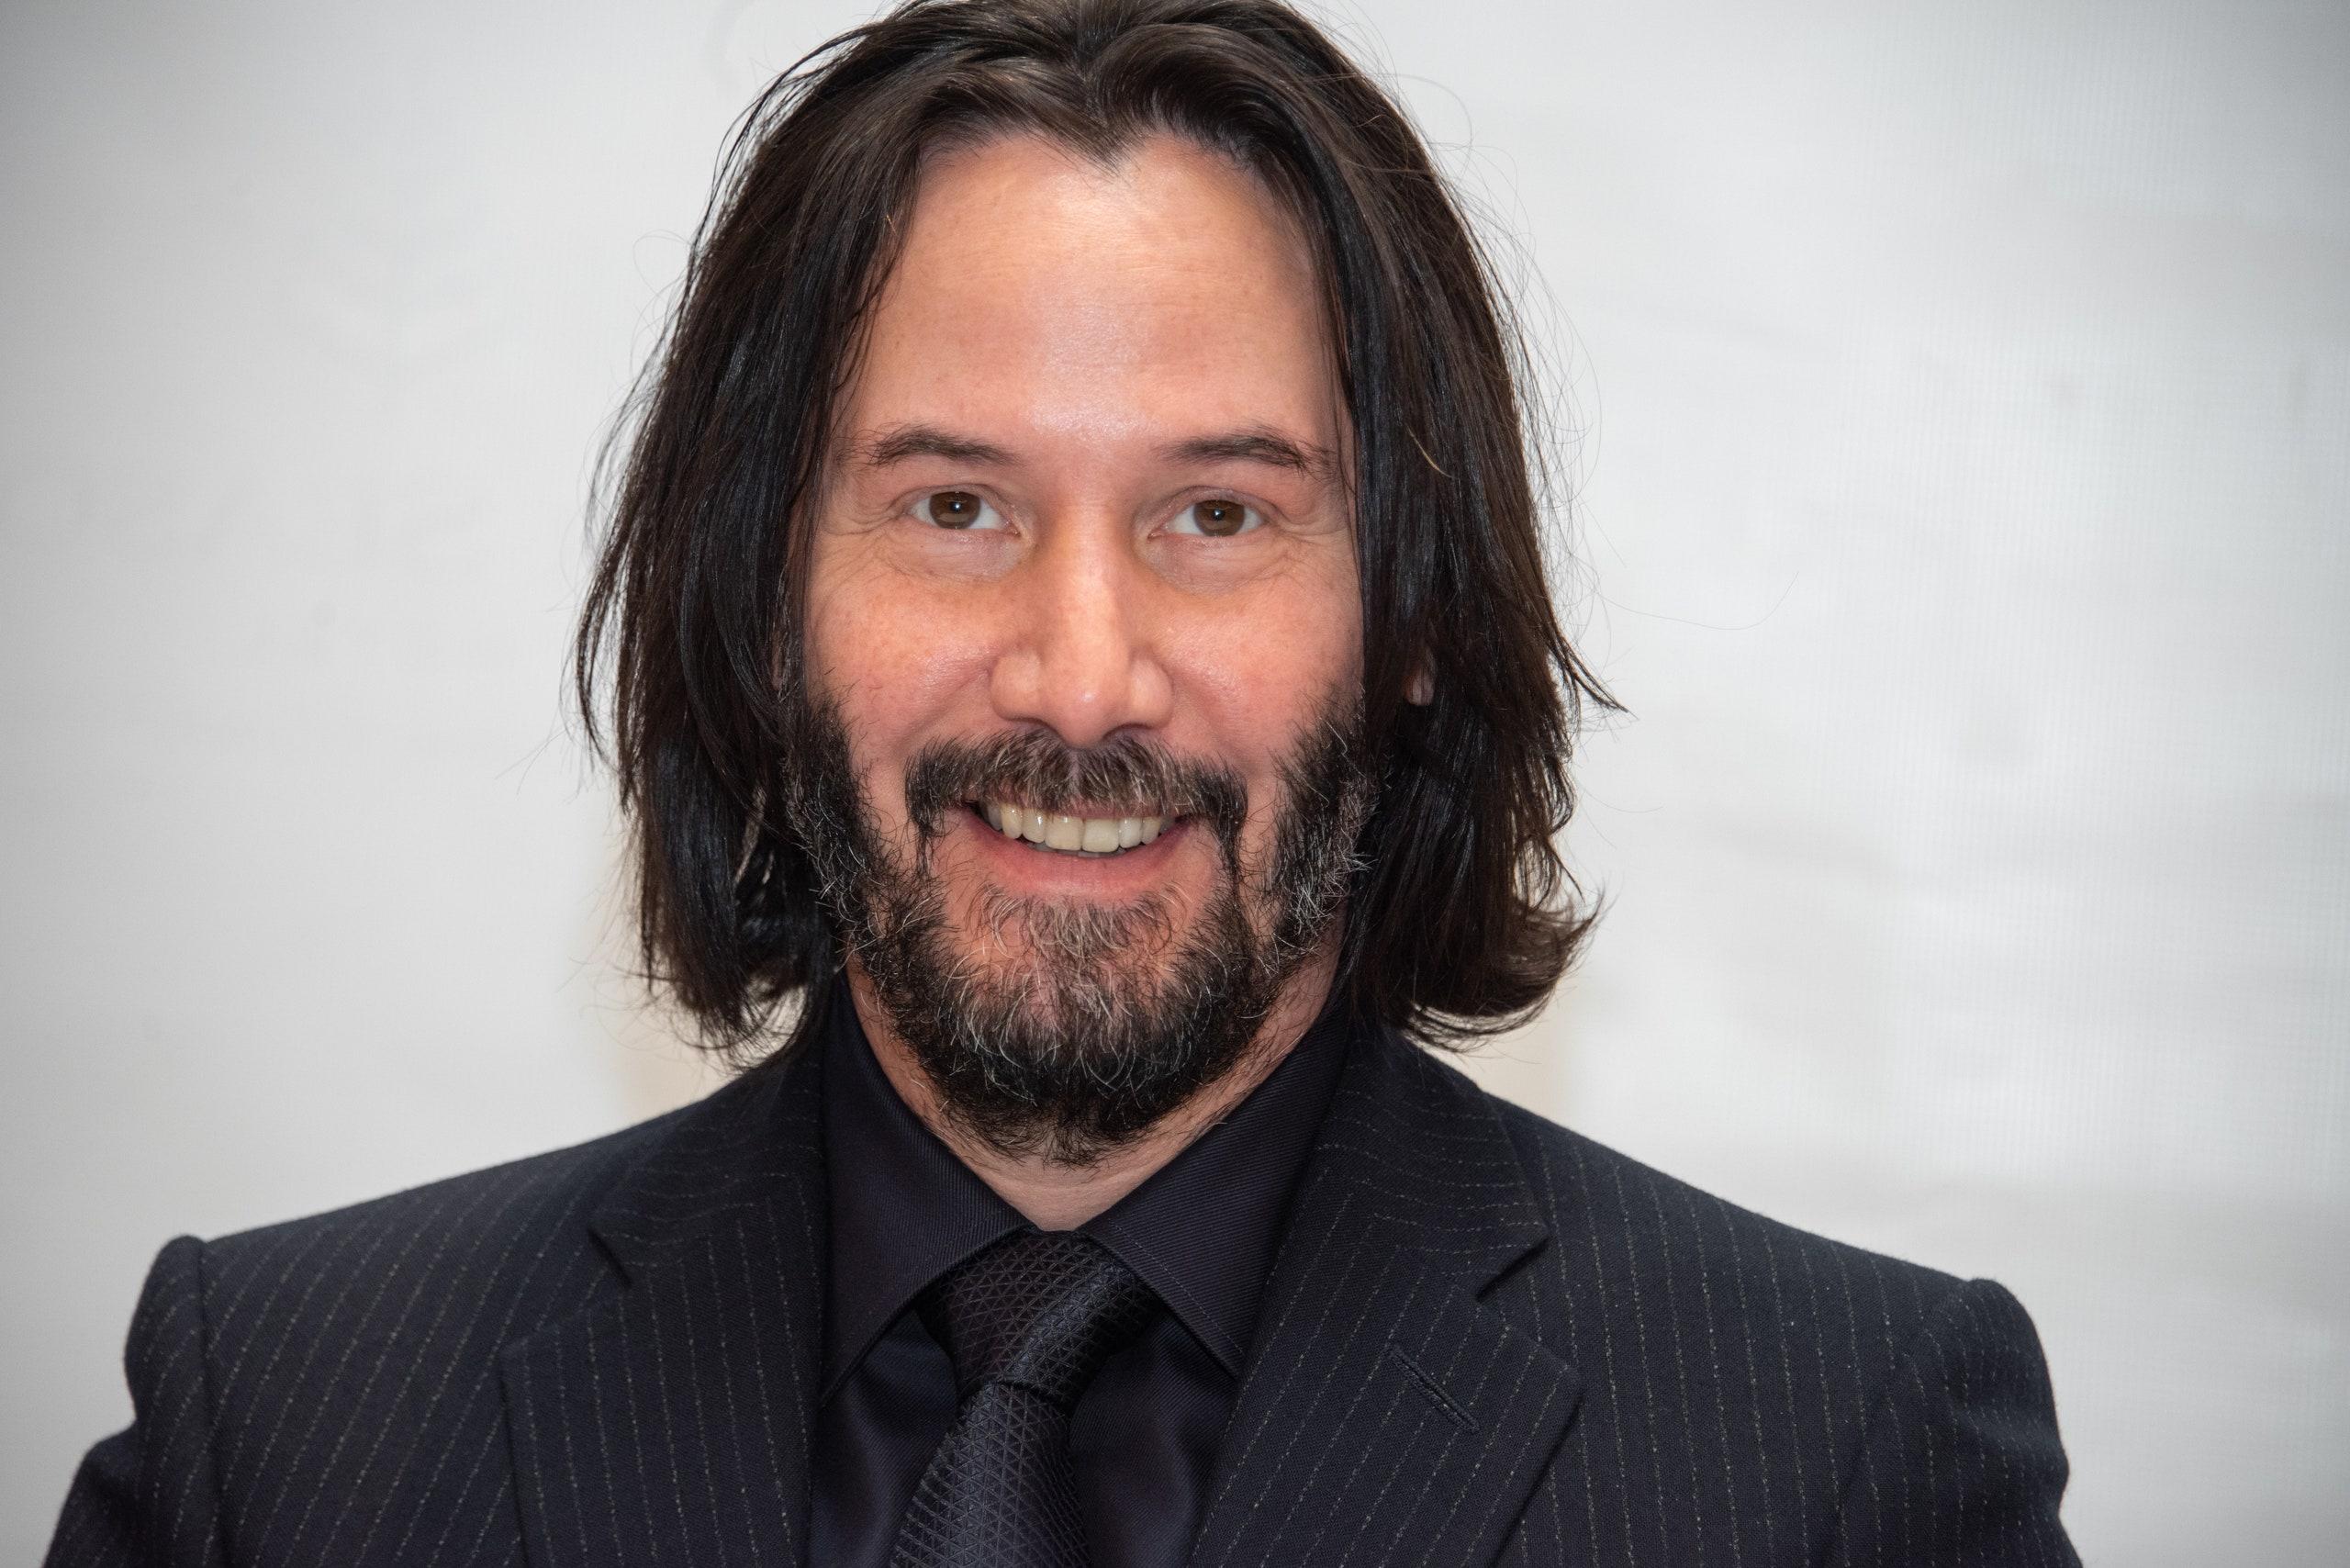 Fans Are Praising The Way Keanu Reeves Takes Photos With Women